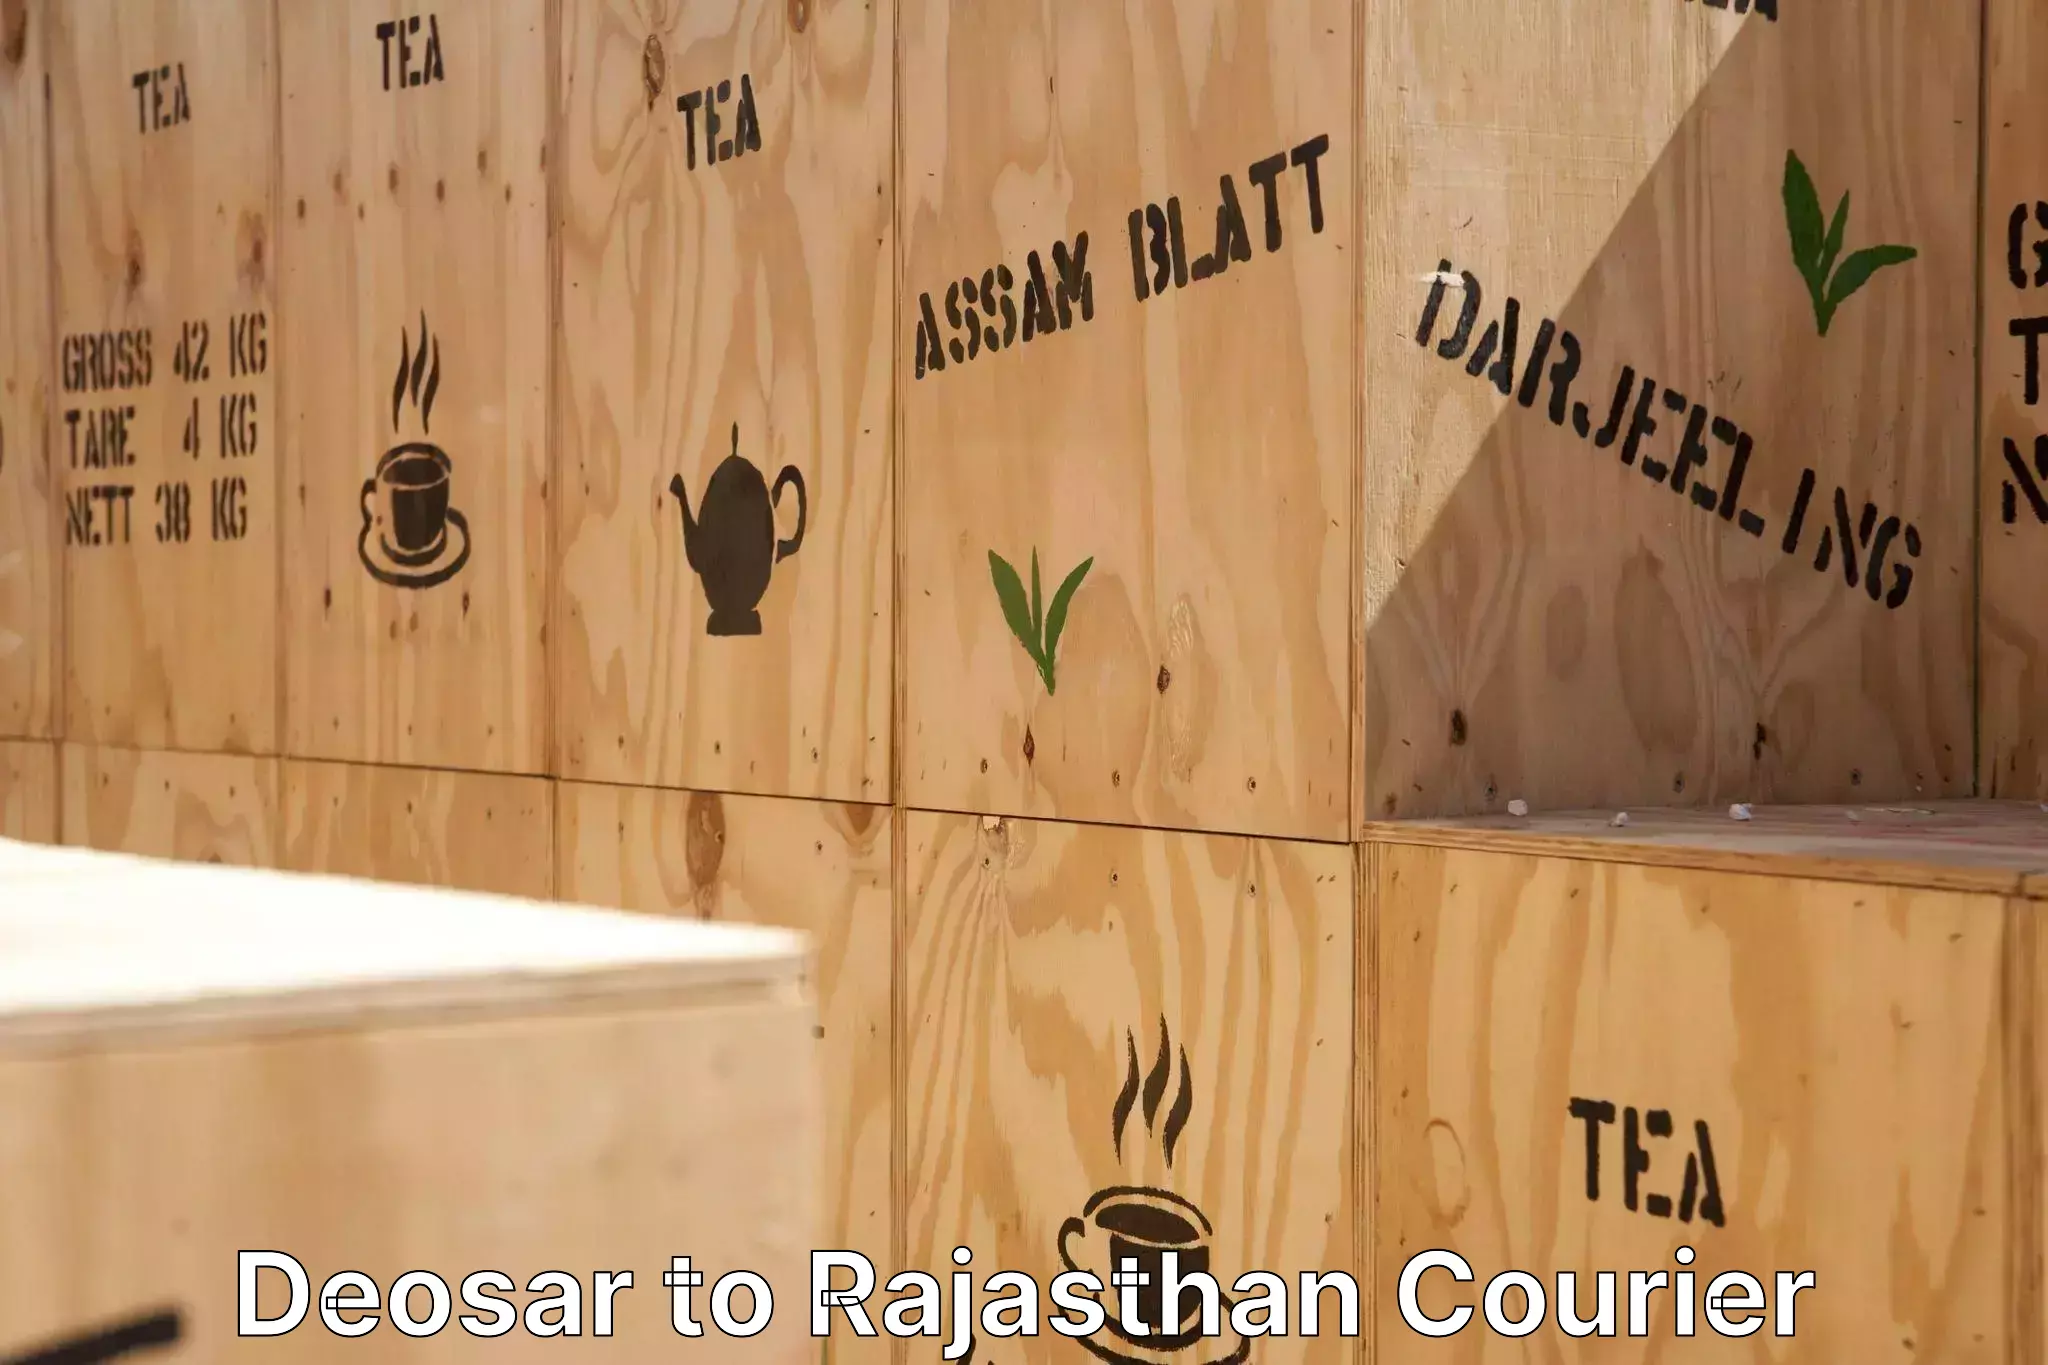 Professional moving company Deosar to Rajasthan